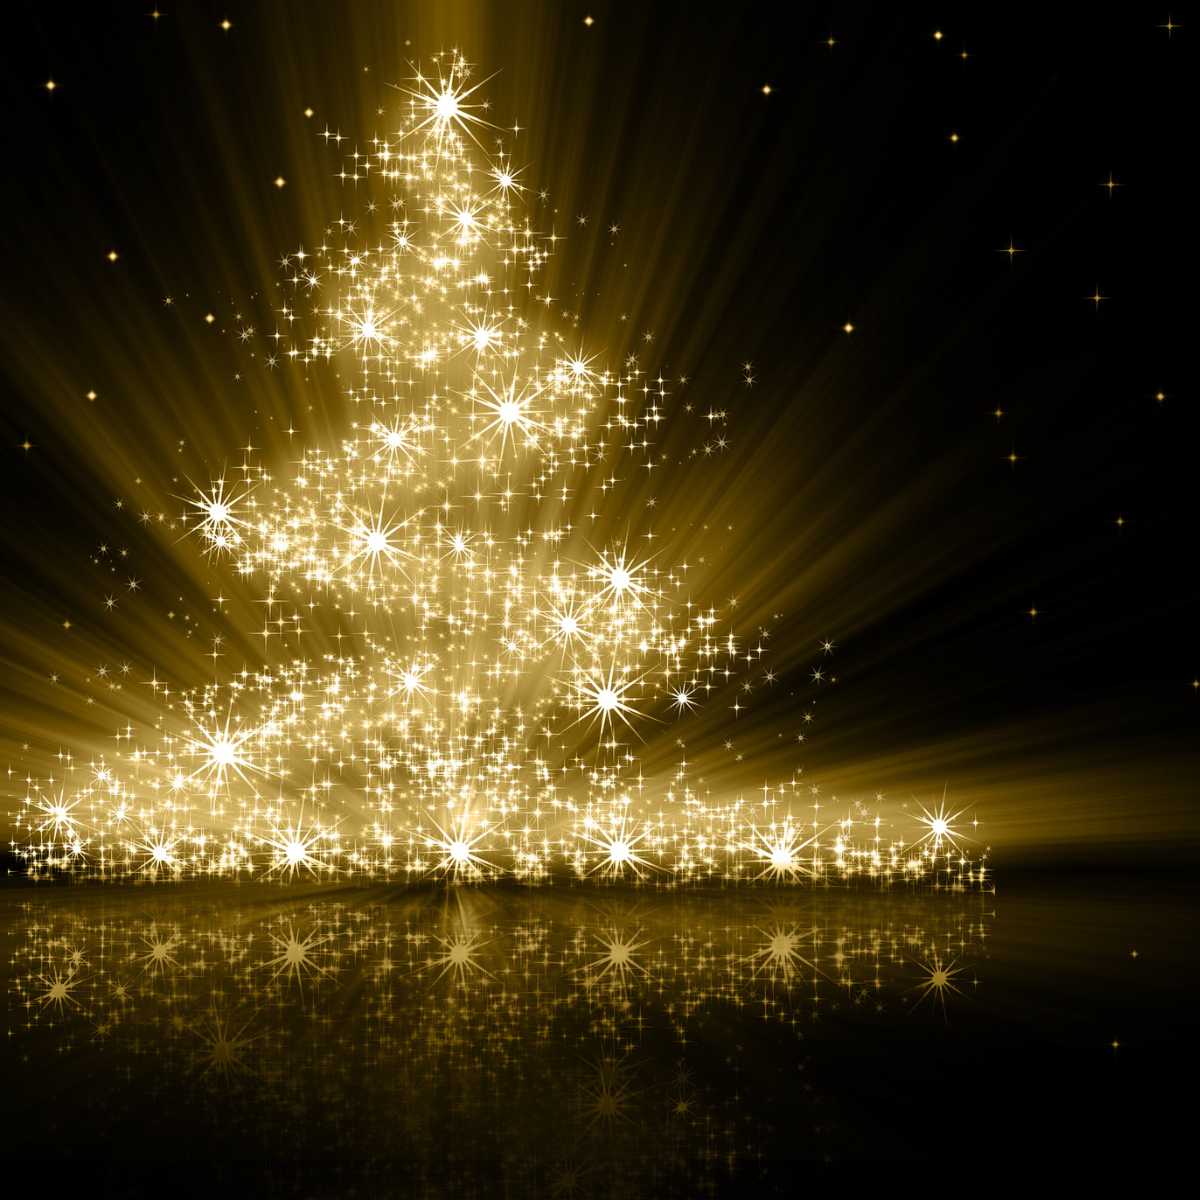 A golden yule tree on a black background.